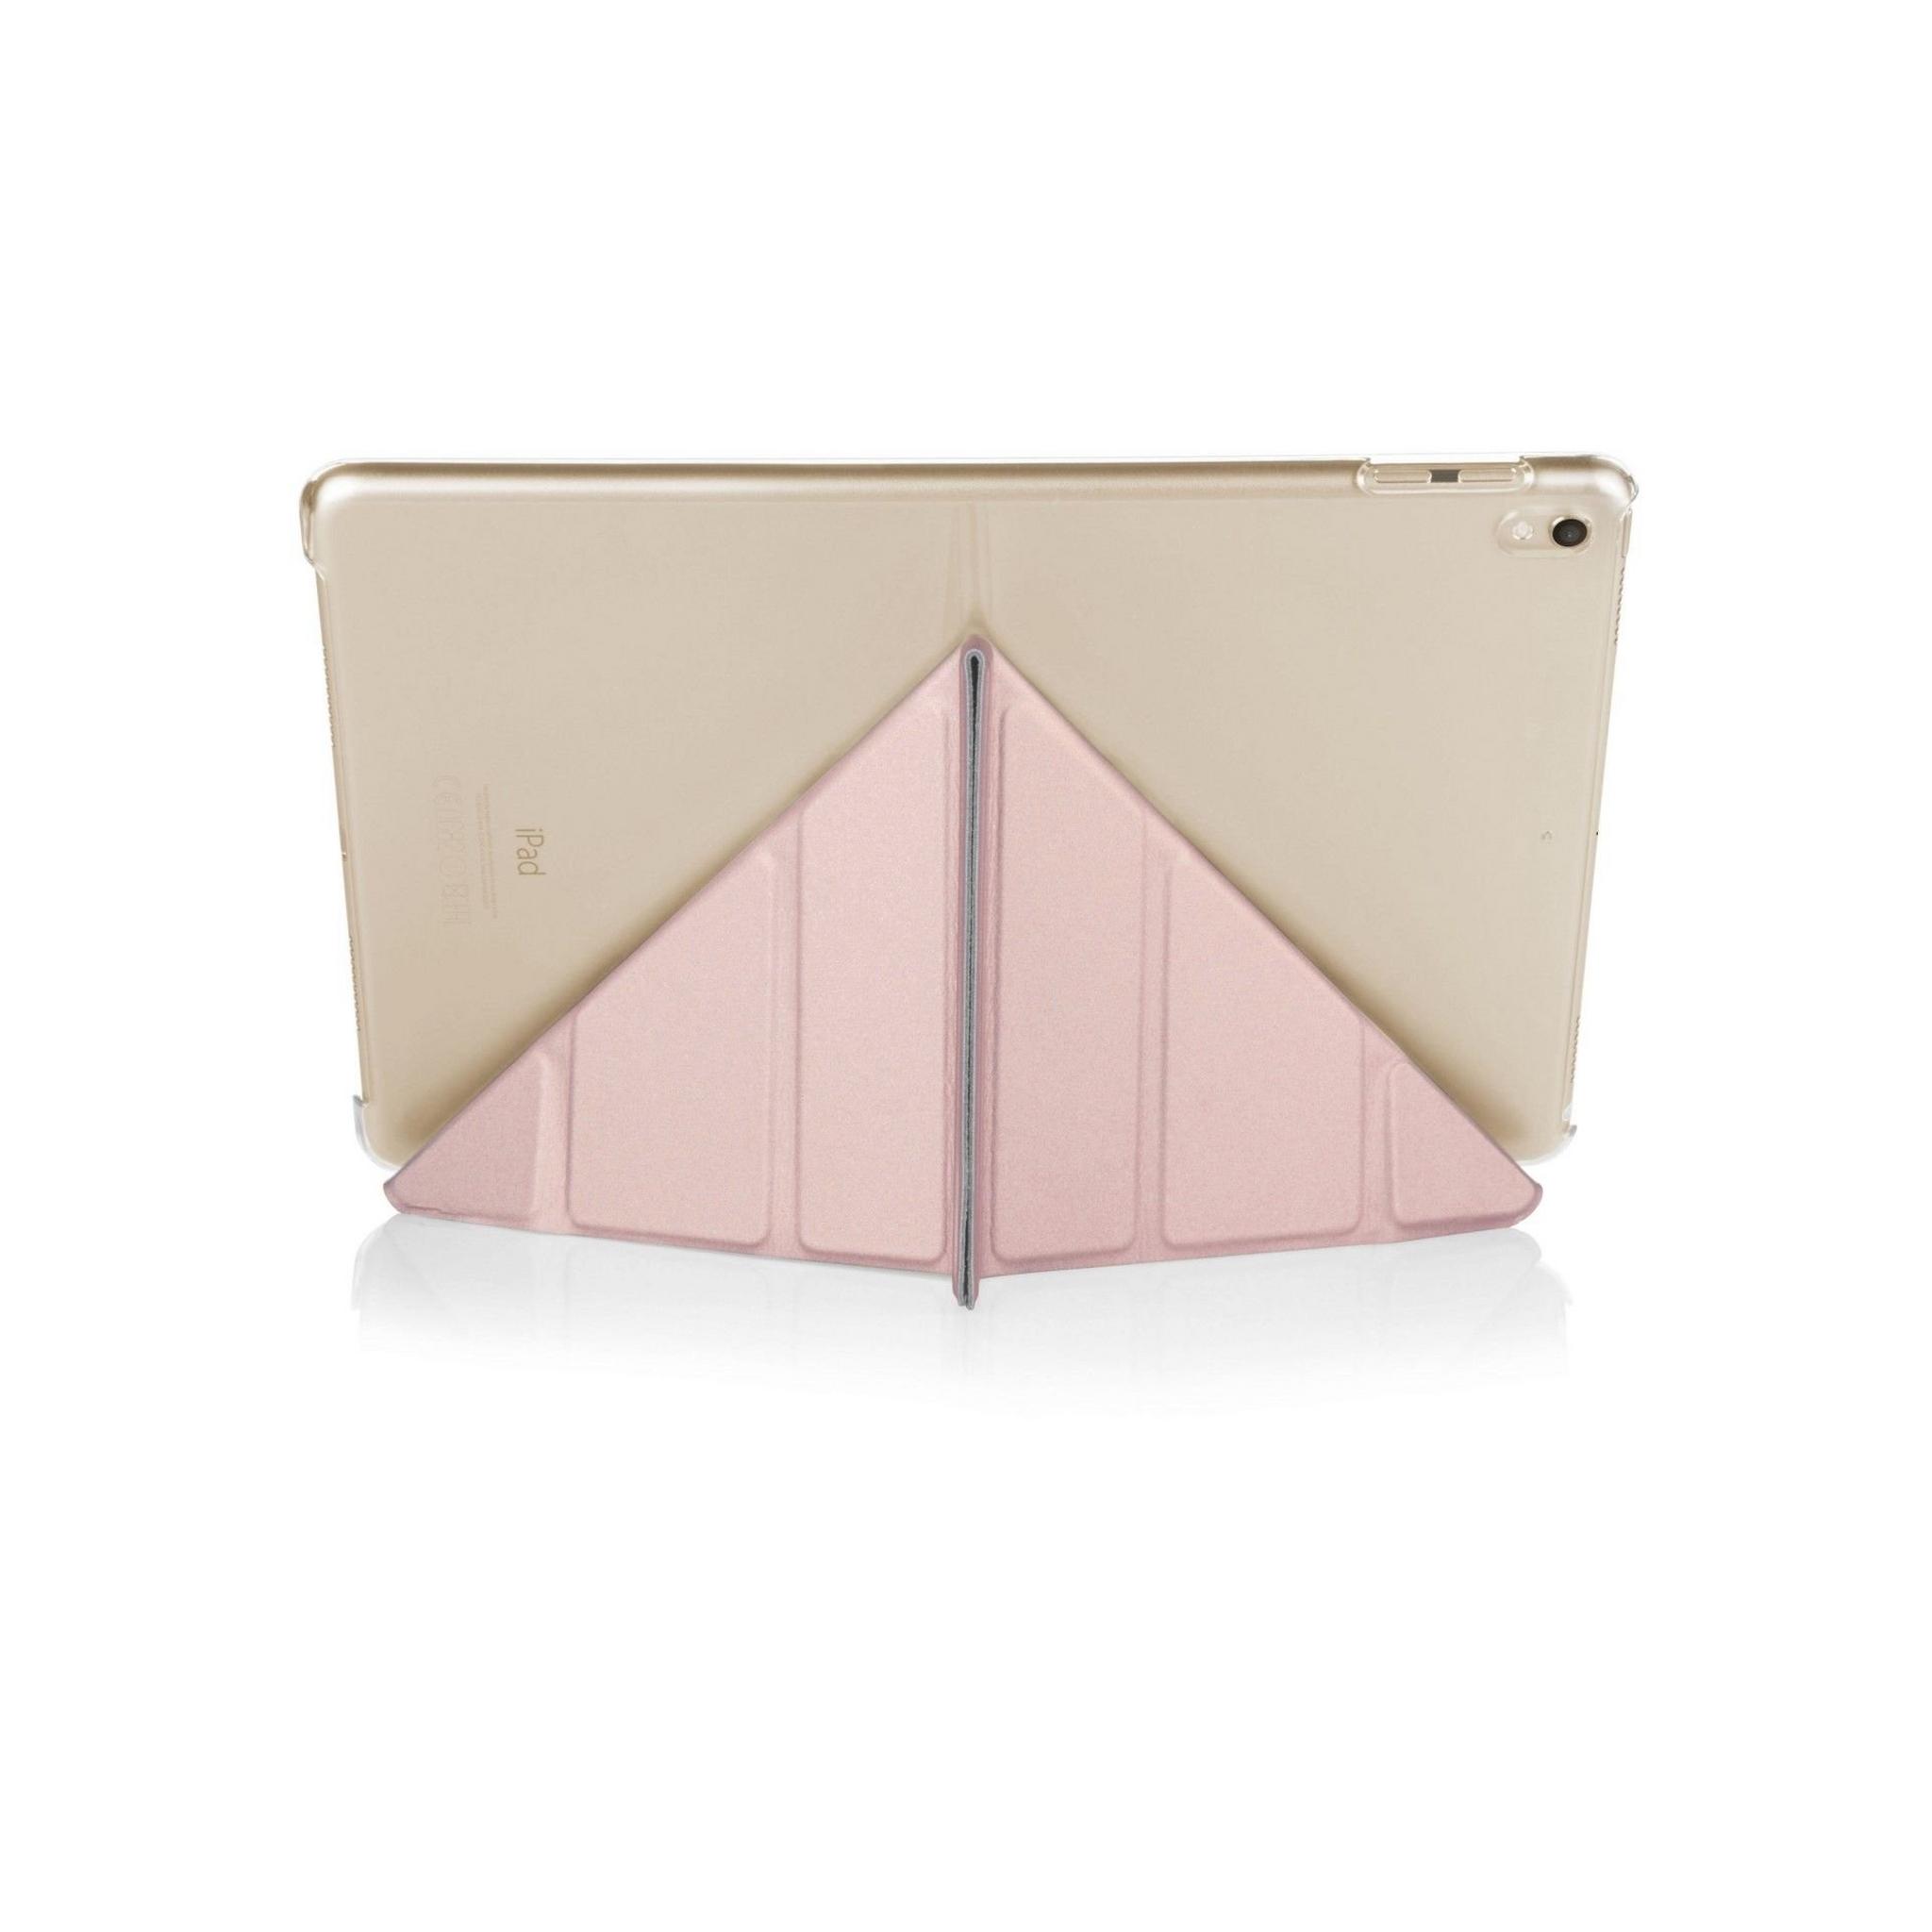 Pipetto Origami Folding Case for Apple iPad 10.2-inch 2019/2020 - Rose Gold